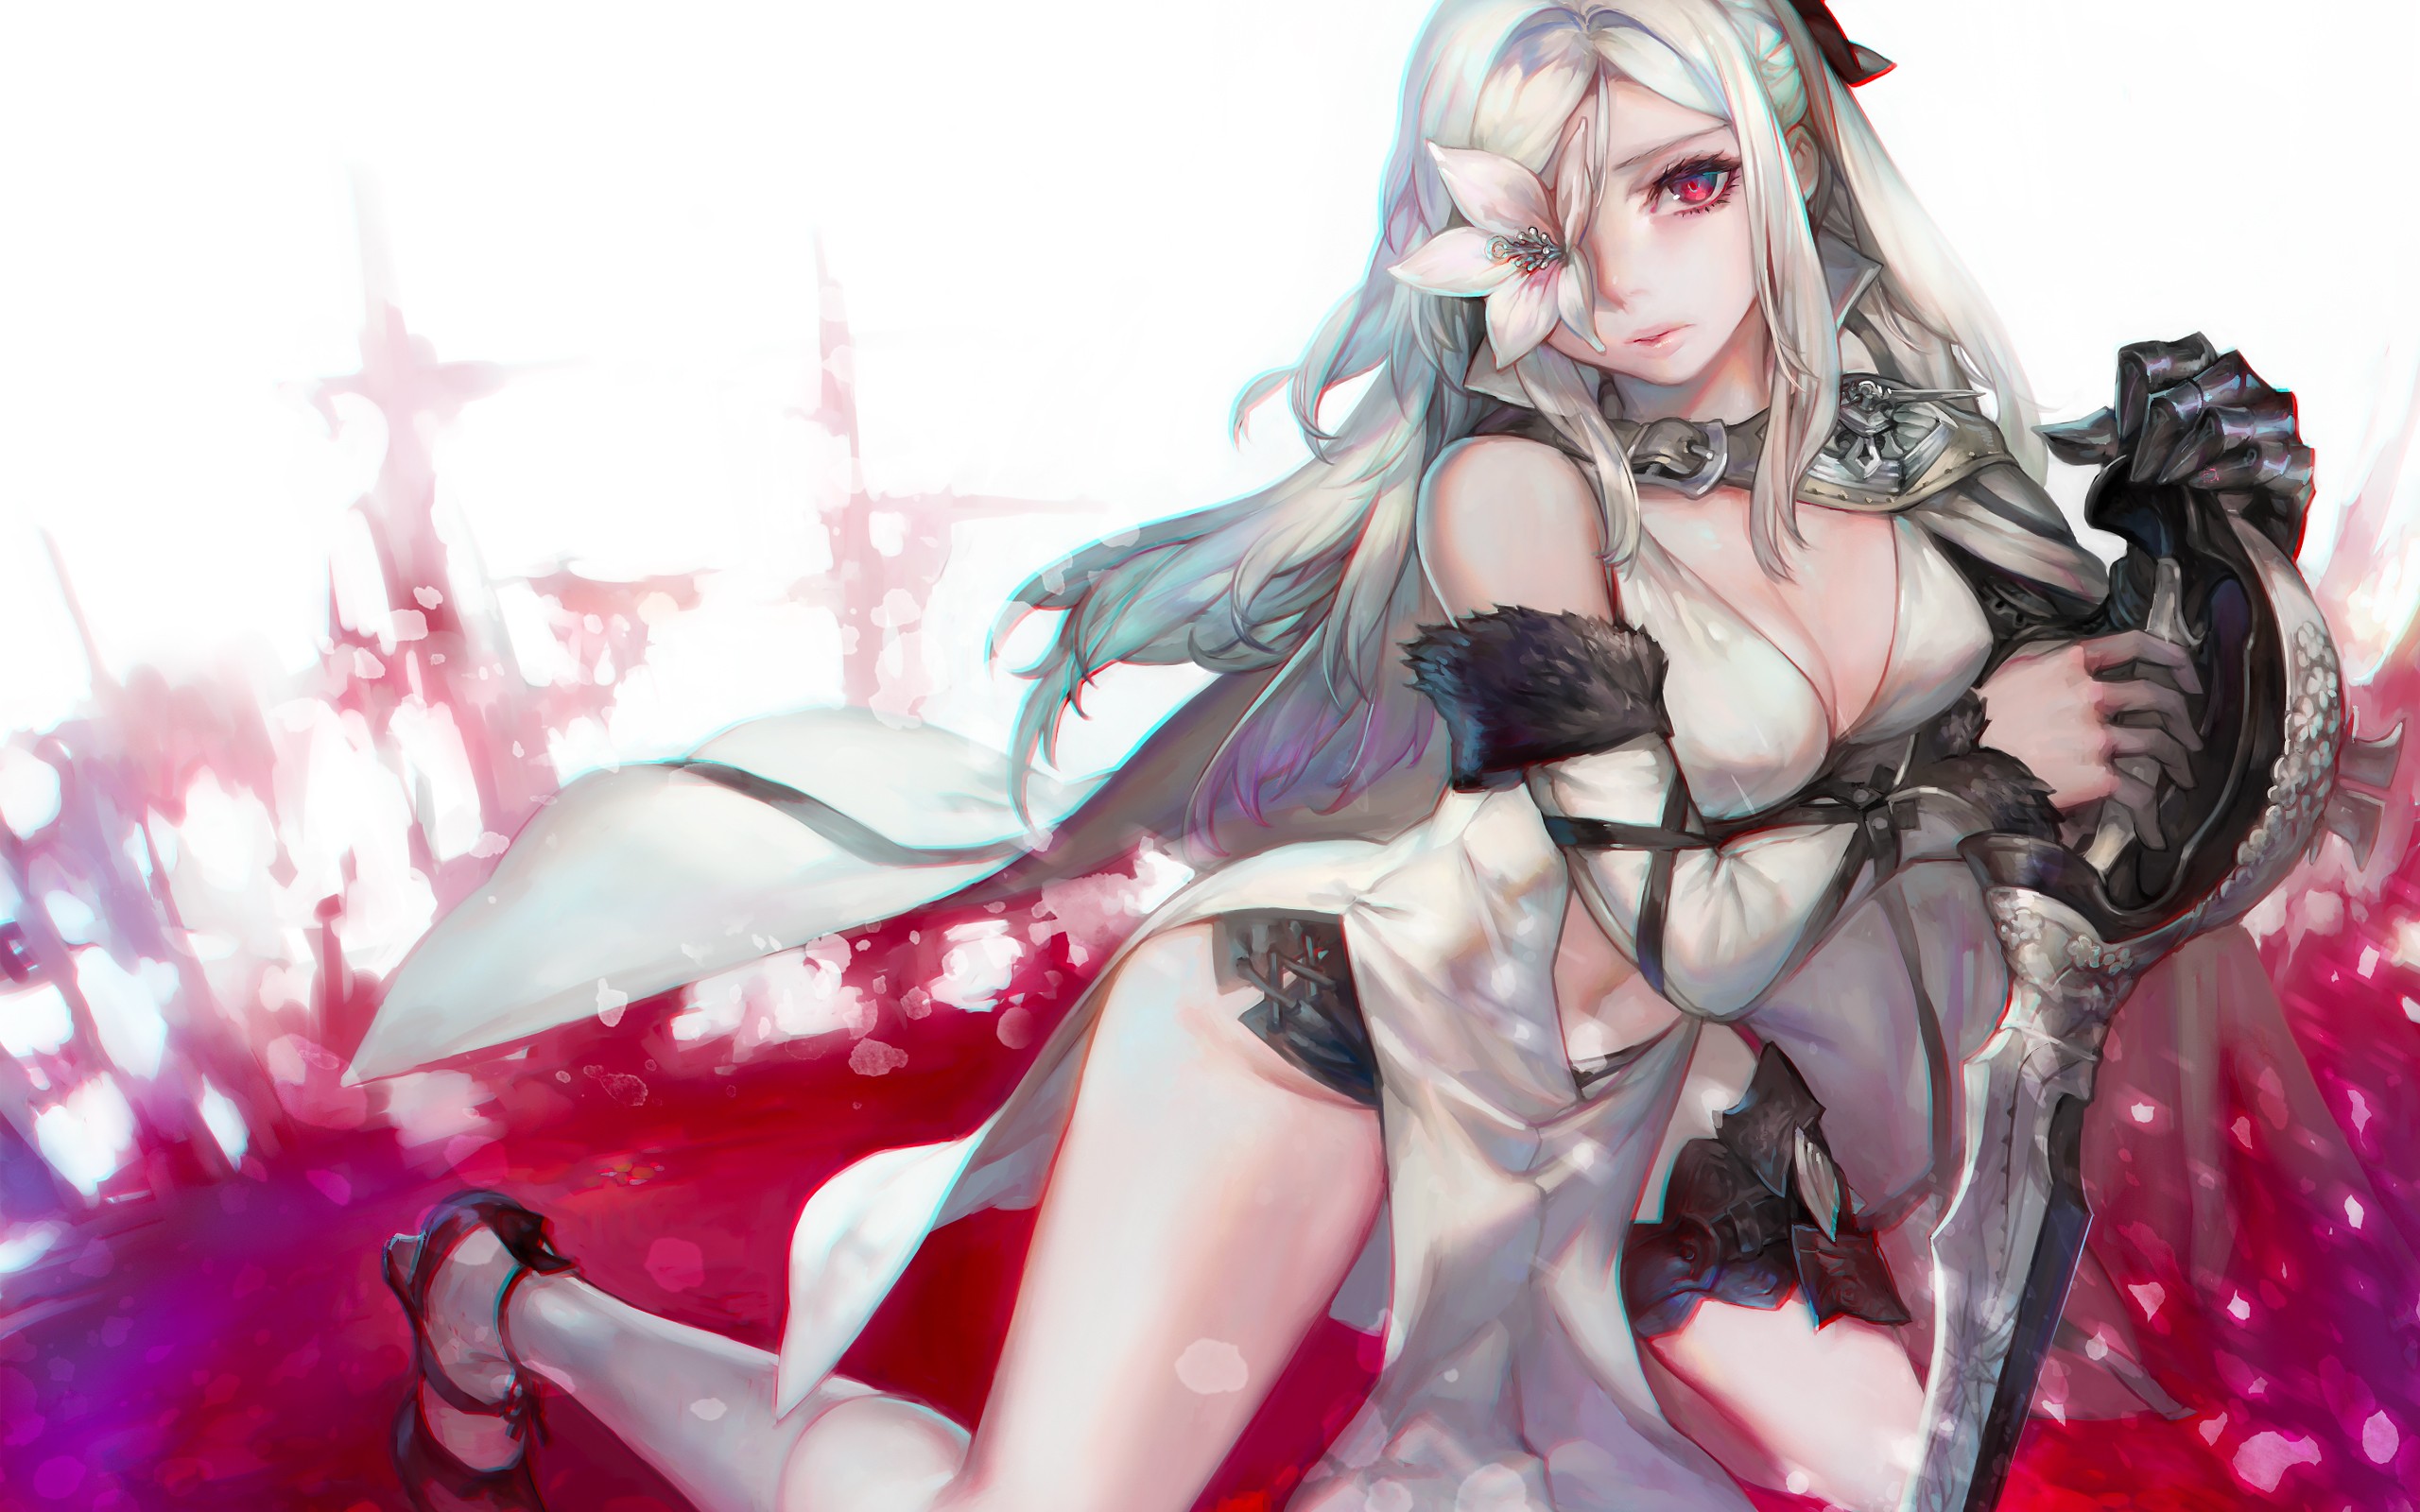 Anime 2560x1600 anime anime girls armor cleavage belly button sword weapon flowers Aoin Drakengard boobs thighs legs Pixiv fantasy art fantasy girl long hair women with swords